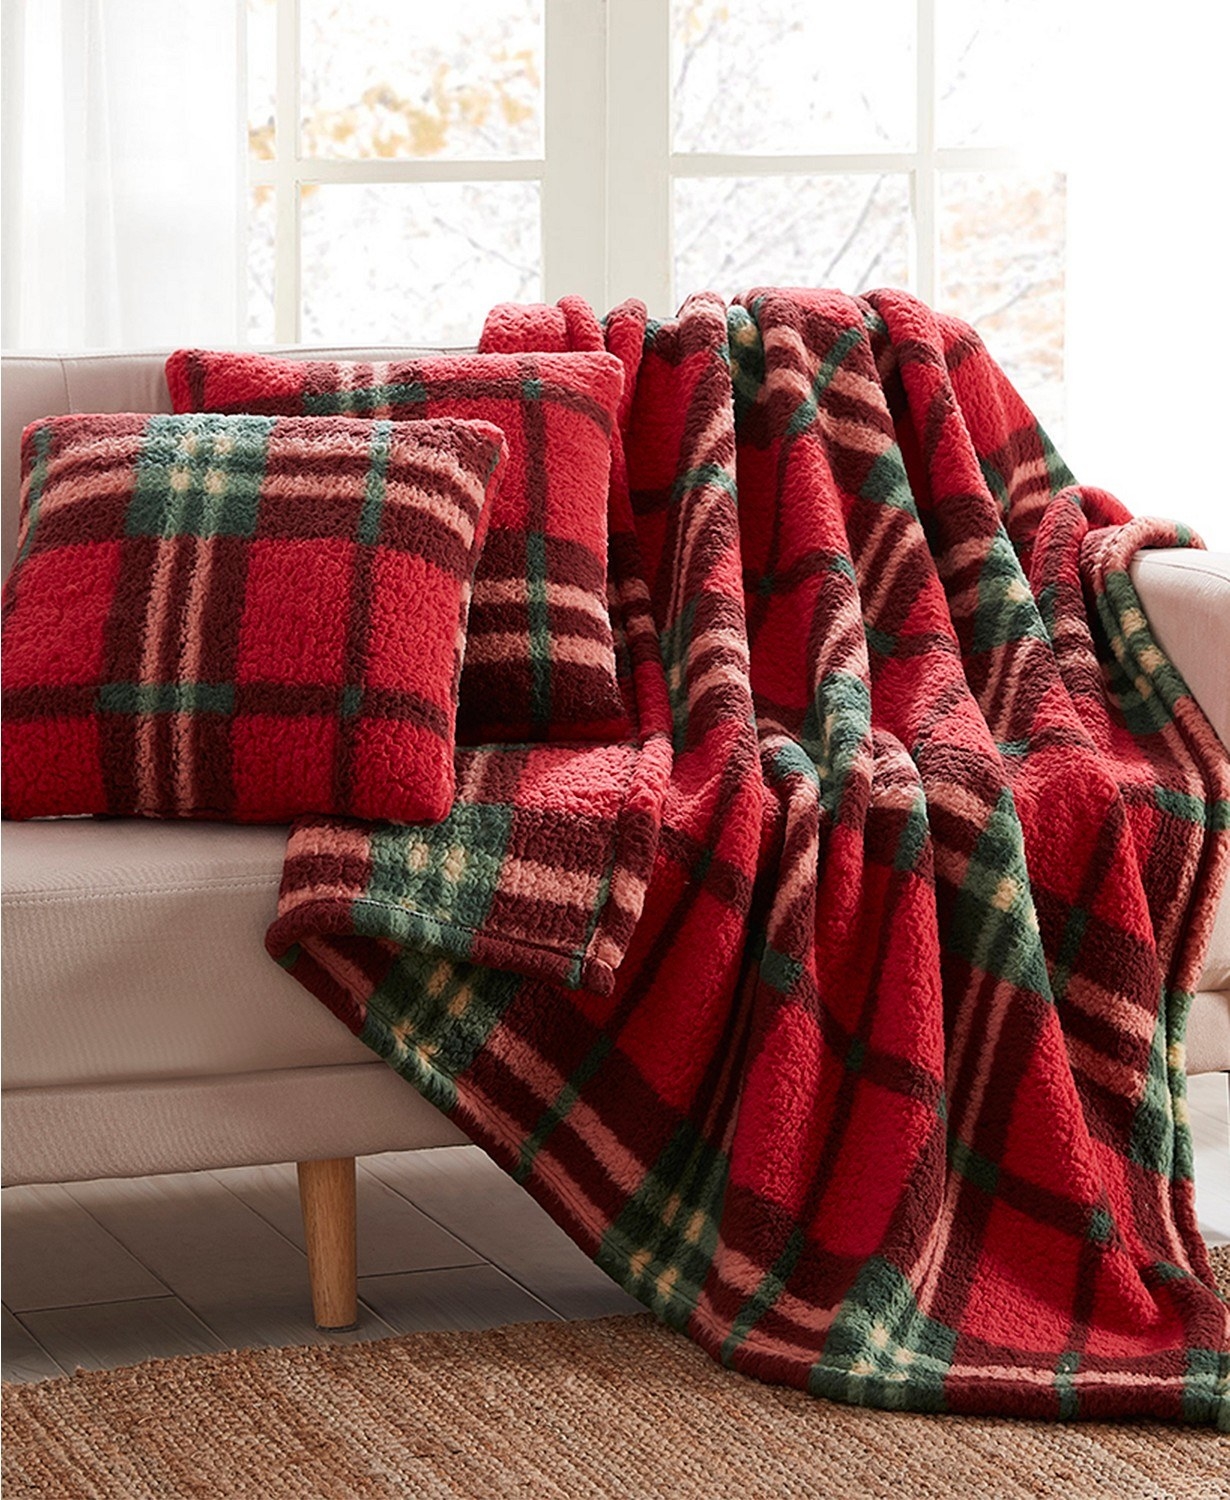 A red plaid blanket and pillows draped over a couch 